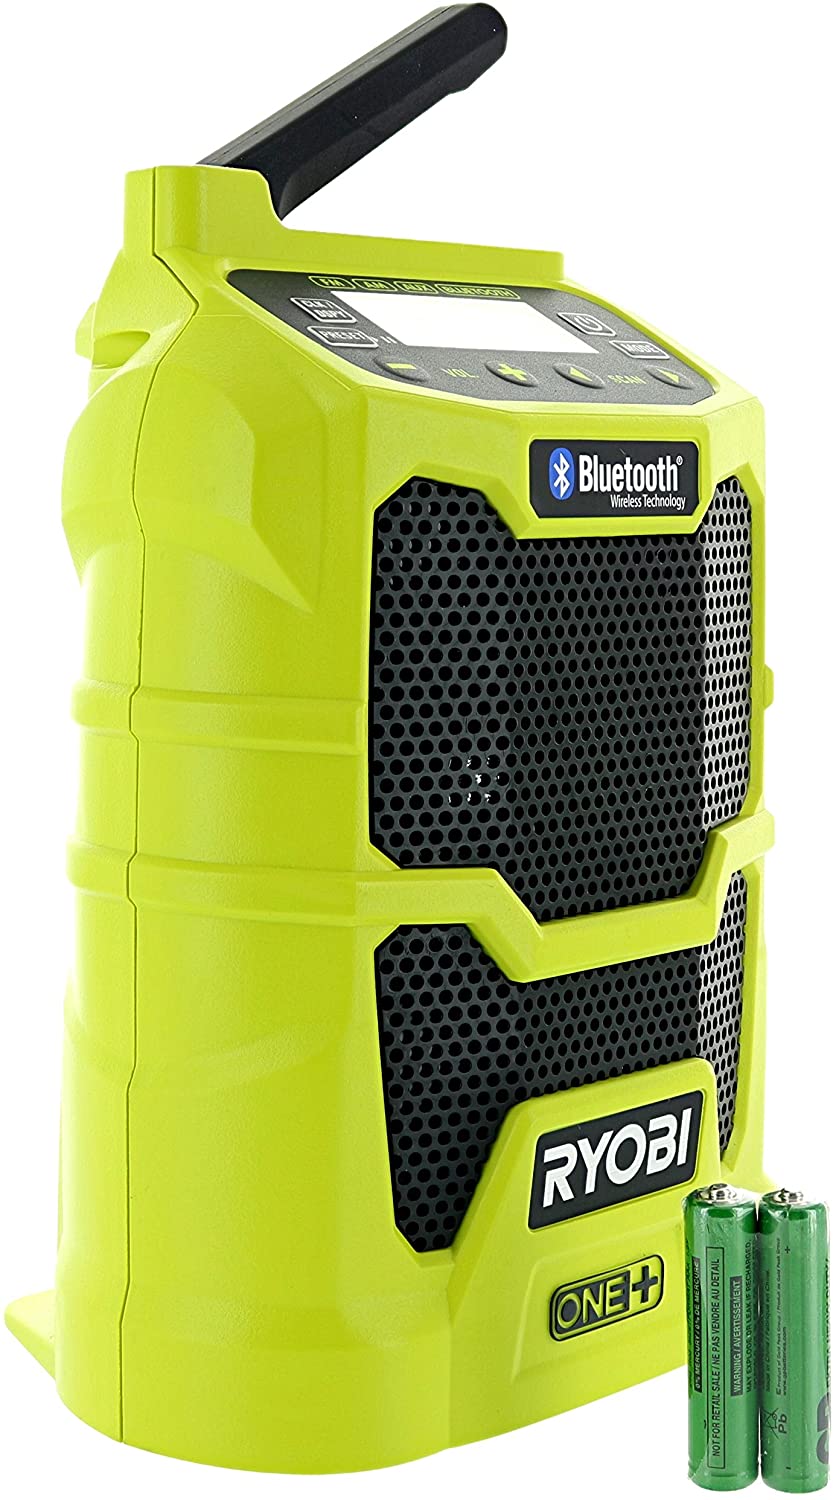 Ryobi P742 One+ 18V Lithium Ion Cordless Compact AM / FM Radio w/ Wireless Bluetooth Technology and Phone Charging (18V Battery Not Included / Radio Only)